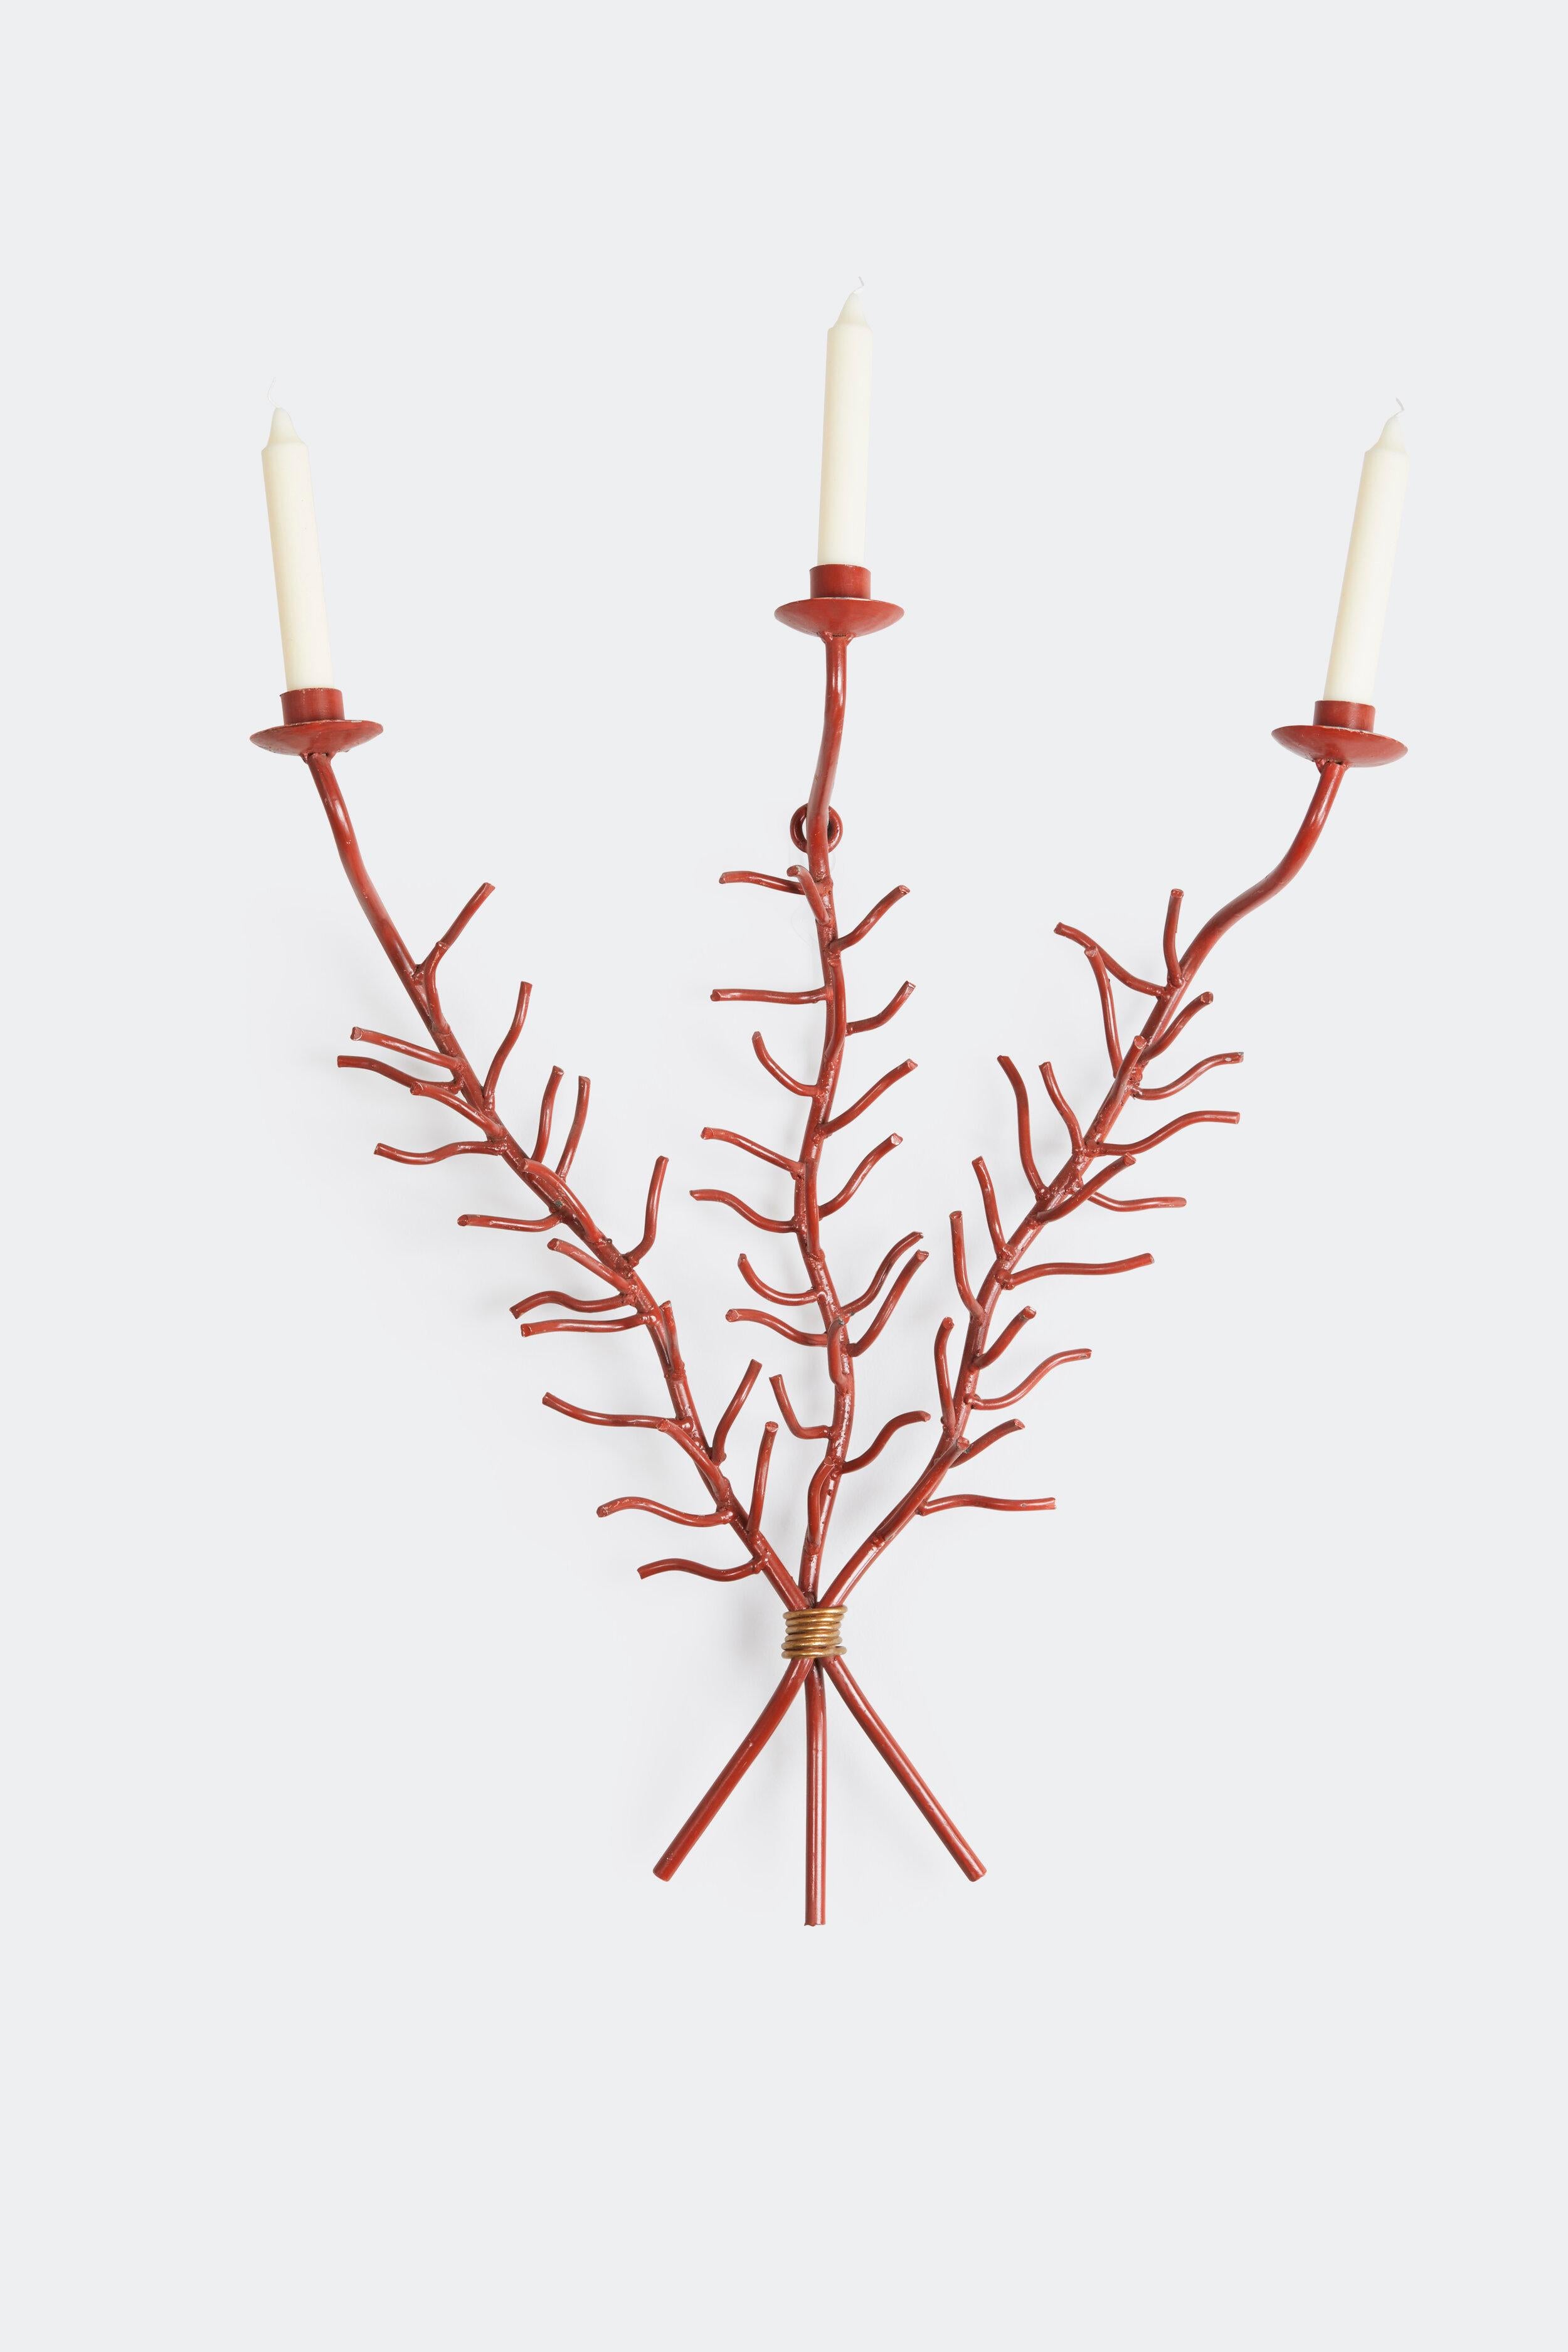 A pair of 20th century red painted iron sconces, each composed of three coral form branches bound by brass wire topped by candle cups. Provenance: de Kwiatkowski estate, designed by Parish-Hadley.